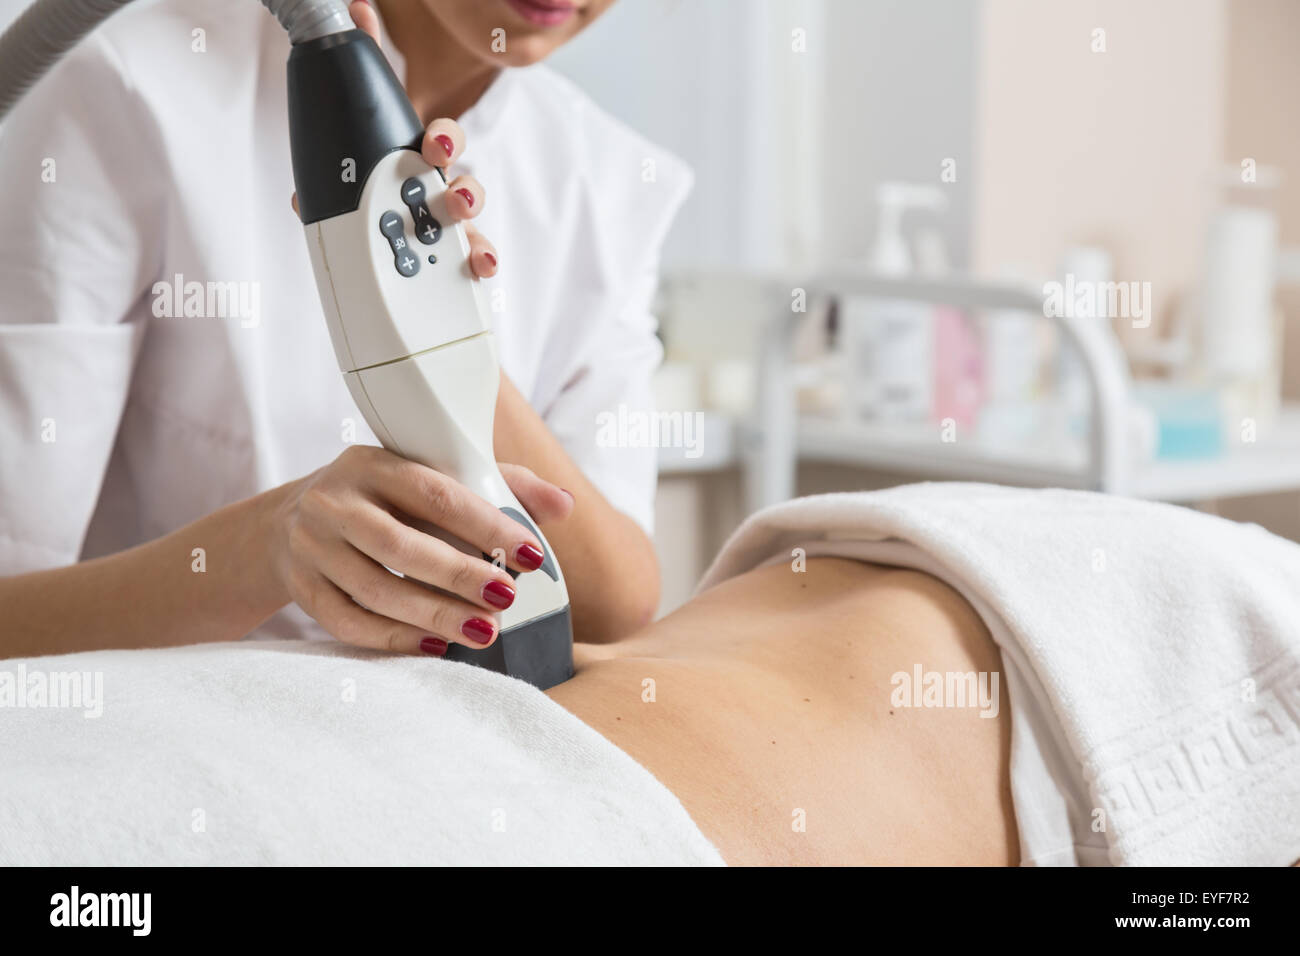 Cosmetician  making procedure of lymphatic drainage with a professional equipment Stock Photo